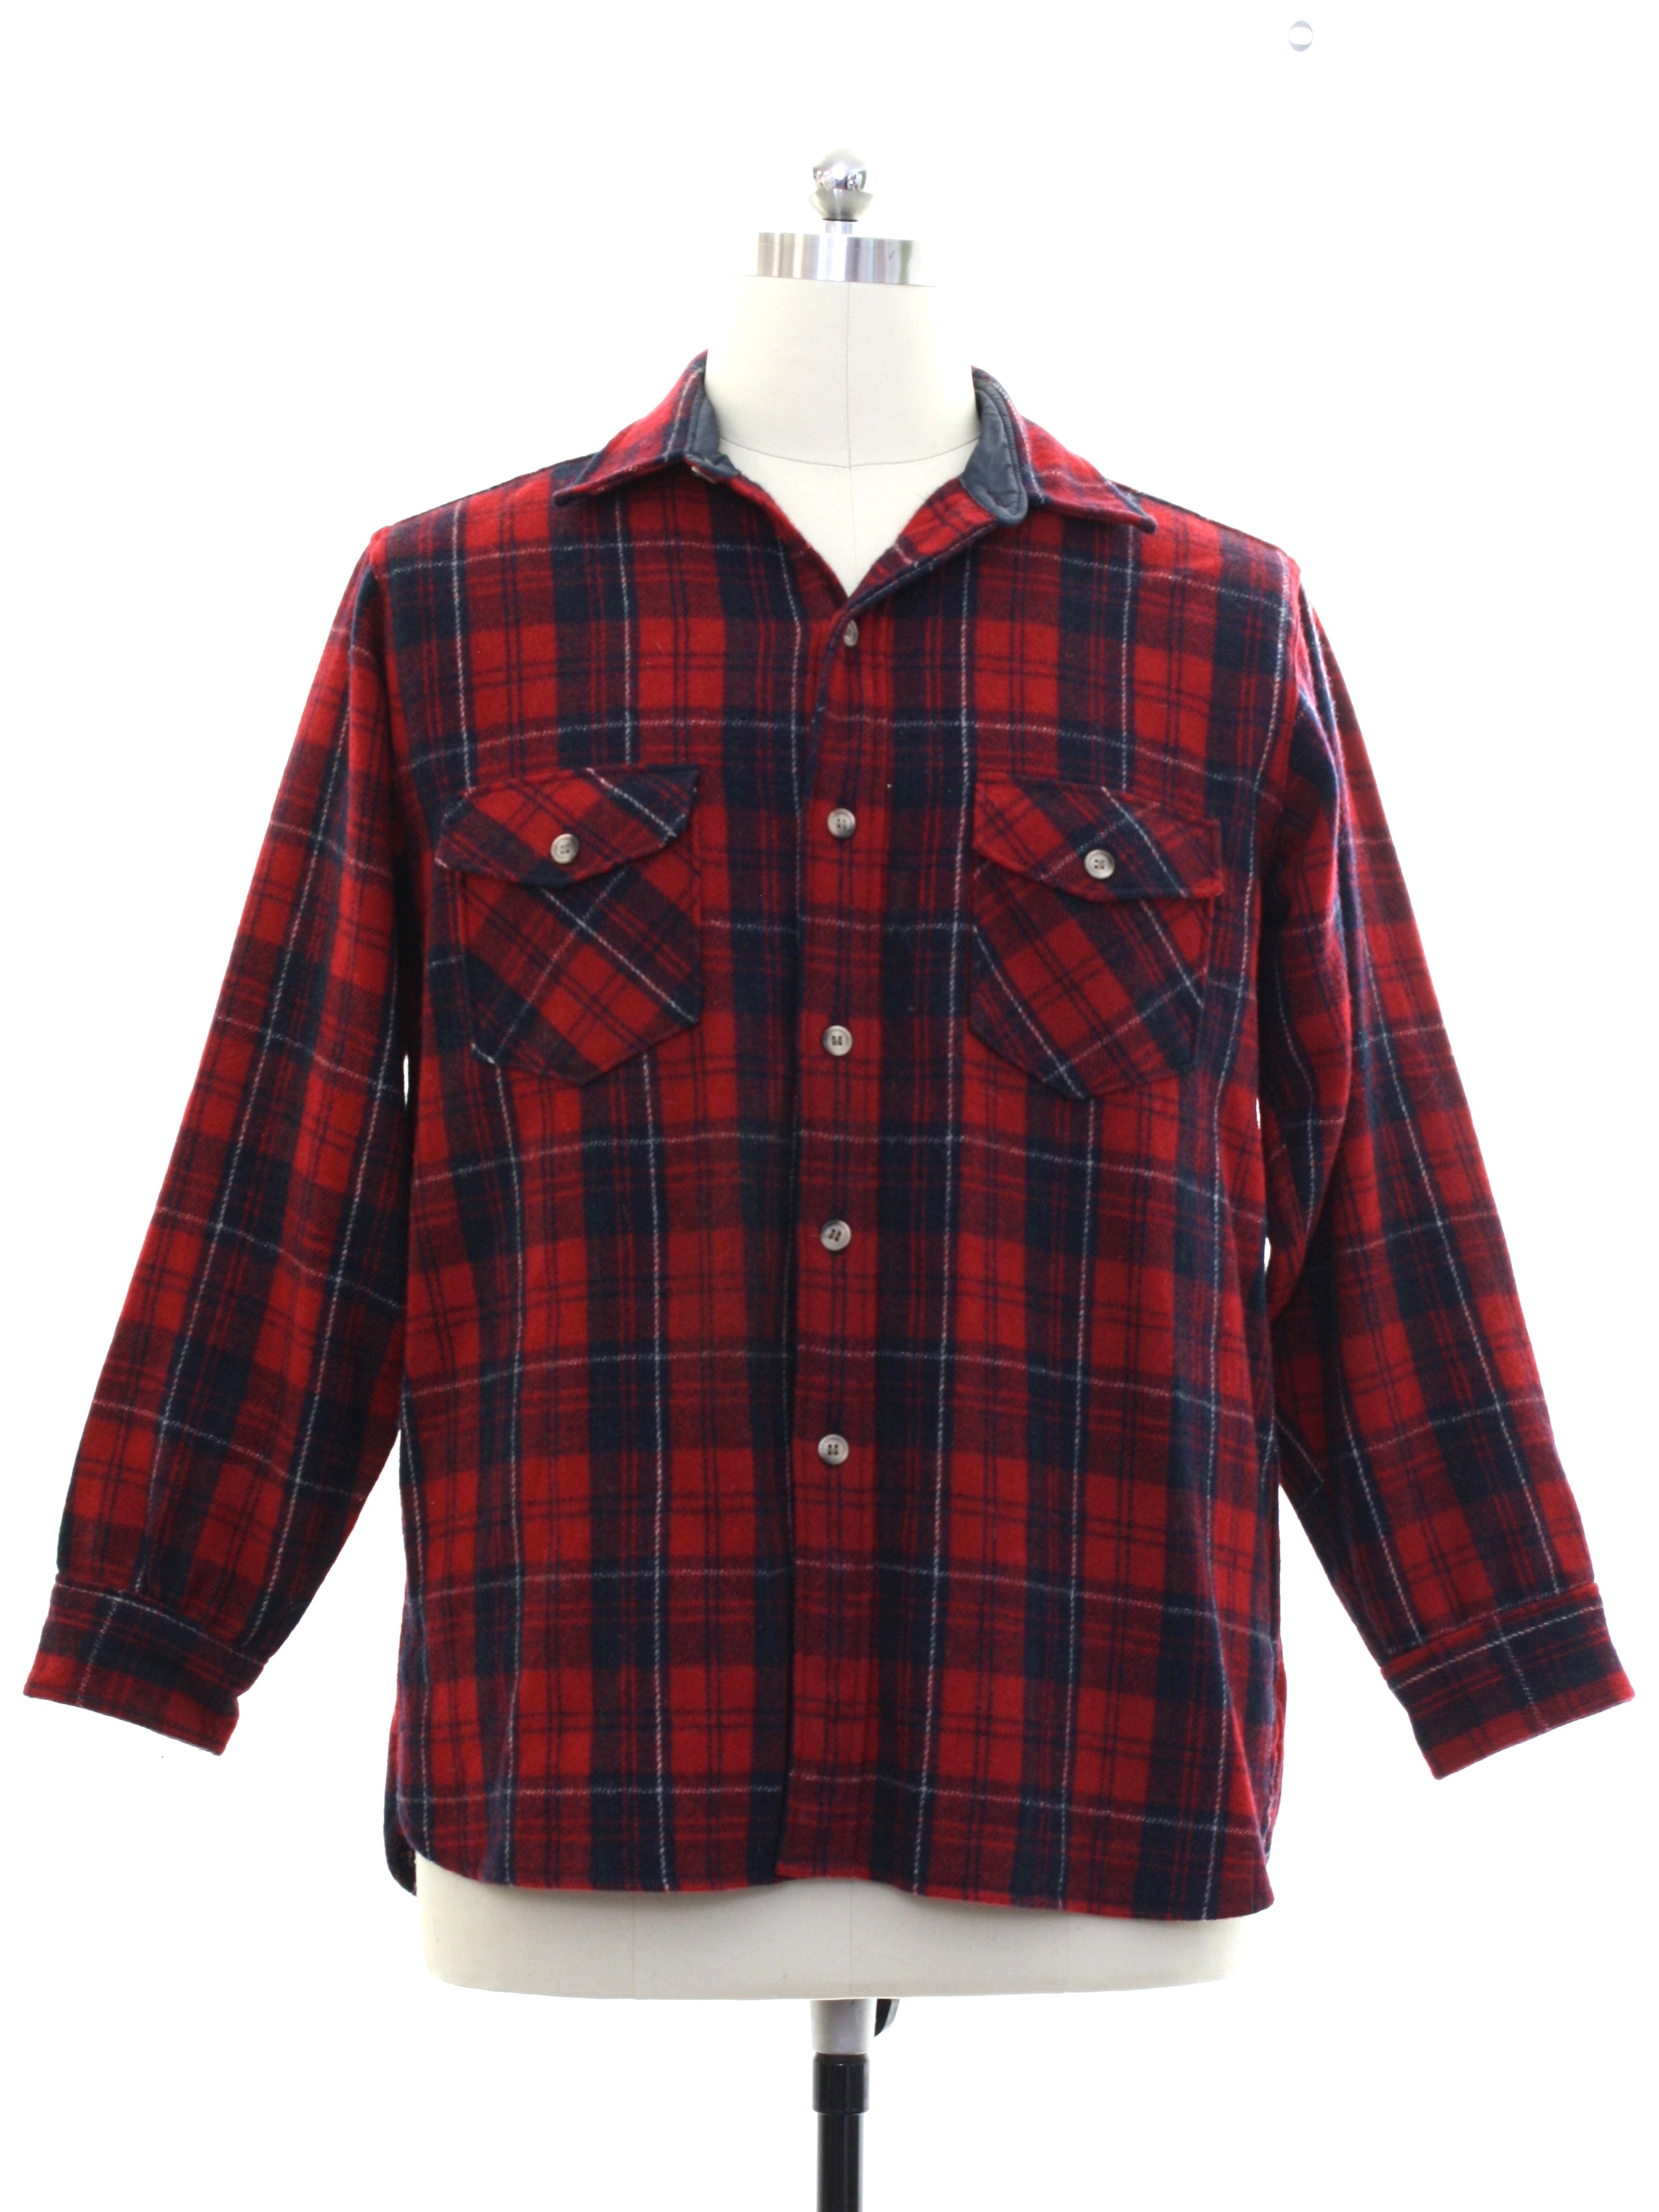 Vintage Woolrich Eighties Shirt: Early 80s -Woolrich- Mens red and navy ...